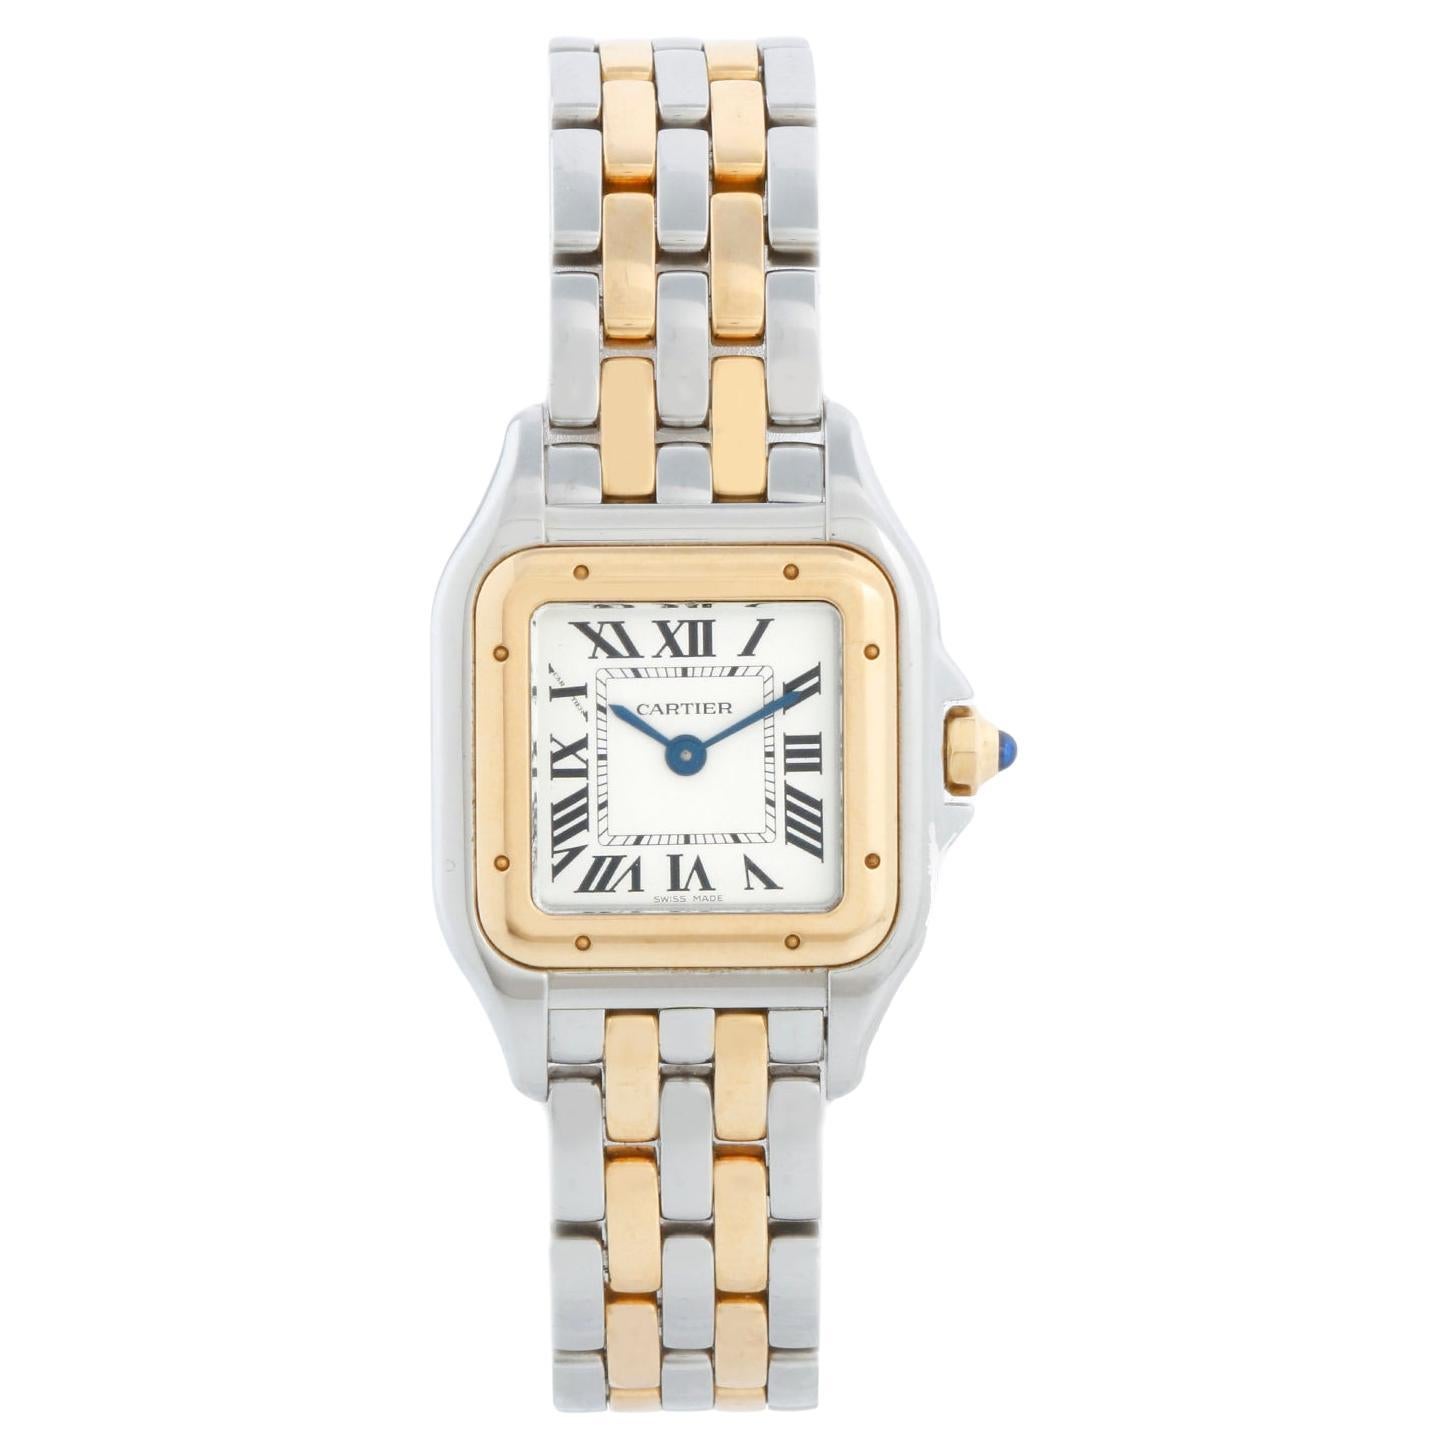 Cartier Panther Small 2-Tone Steel & Gold Panthere Watch 4023 W2PN0006 For Sale